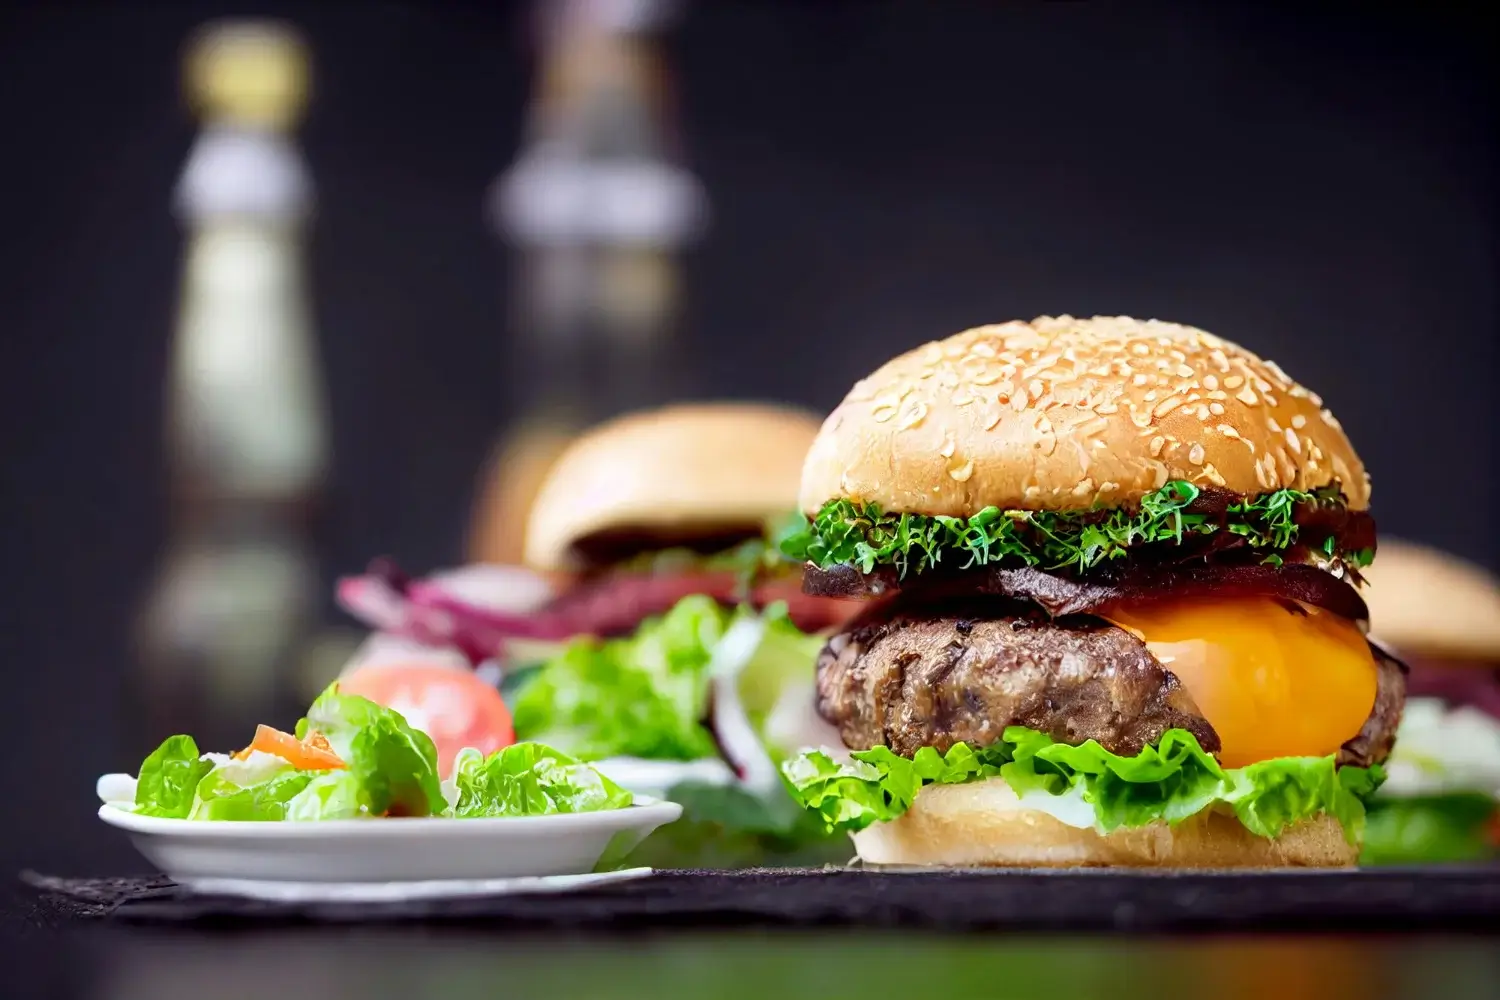 delicious-burger-with-vegetables-on-front-of-behind-another-burger-standing